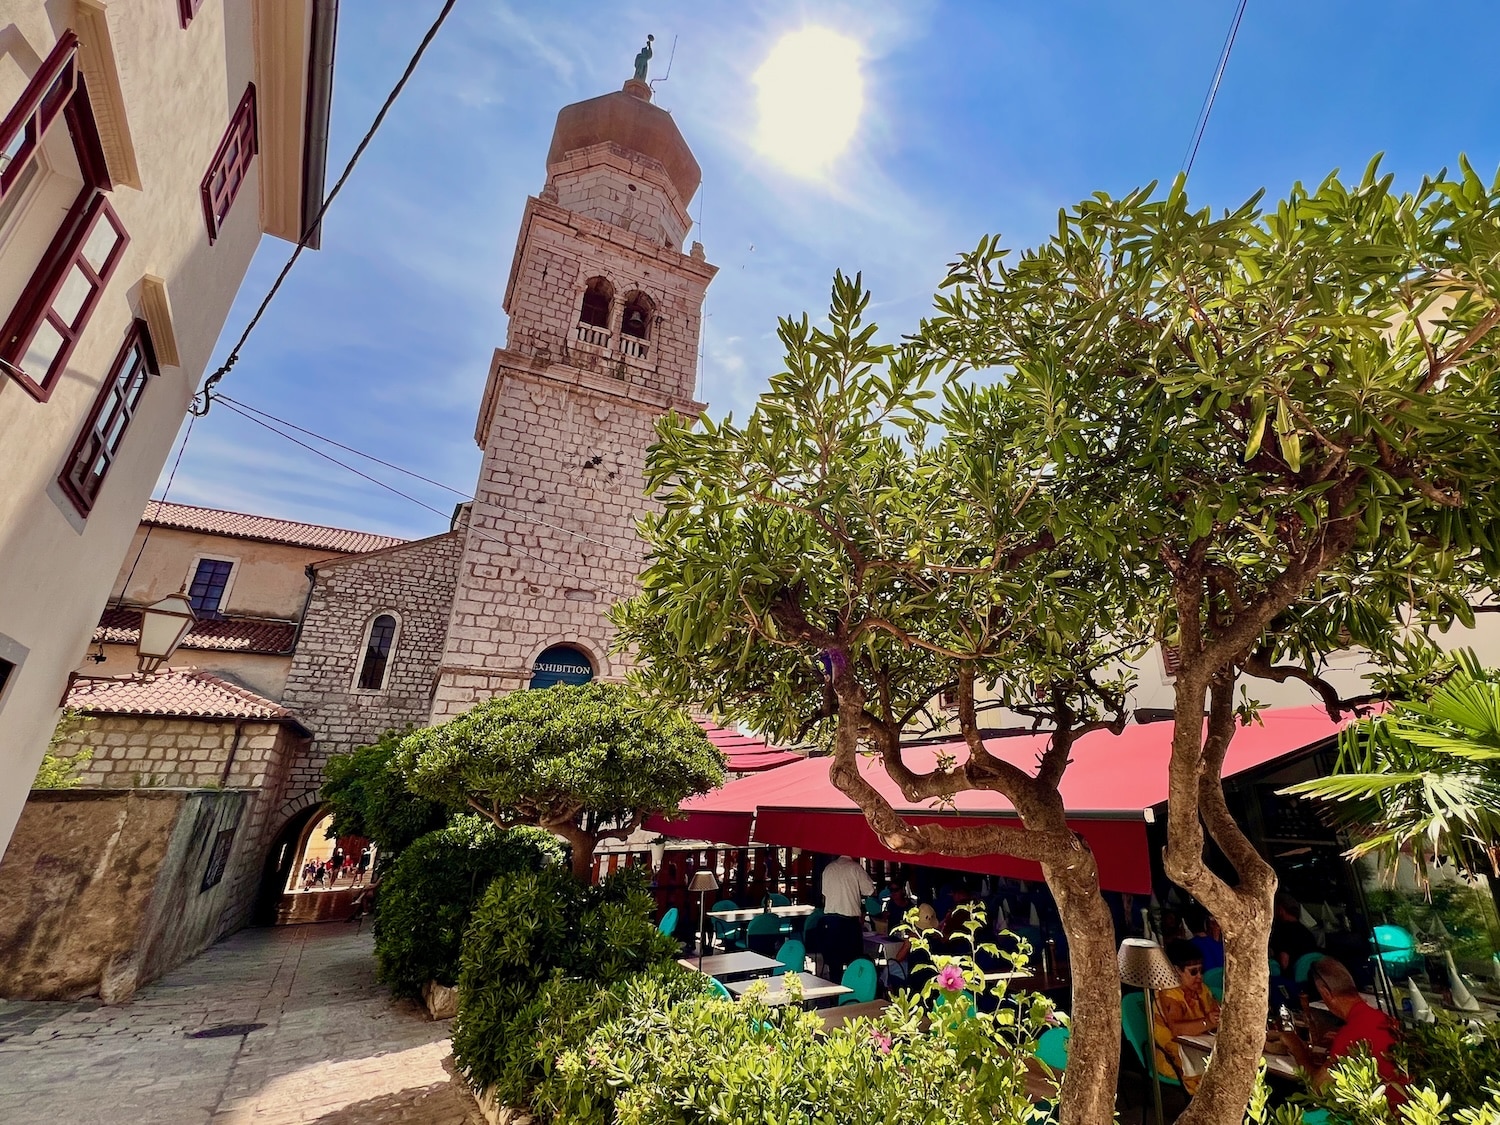 In Krk town you can park near the harbor (with parking permit) and explore the old town. Photo: Sascha Tegtmeyer